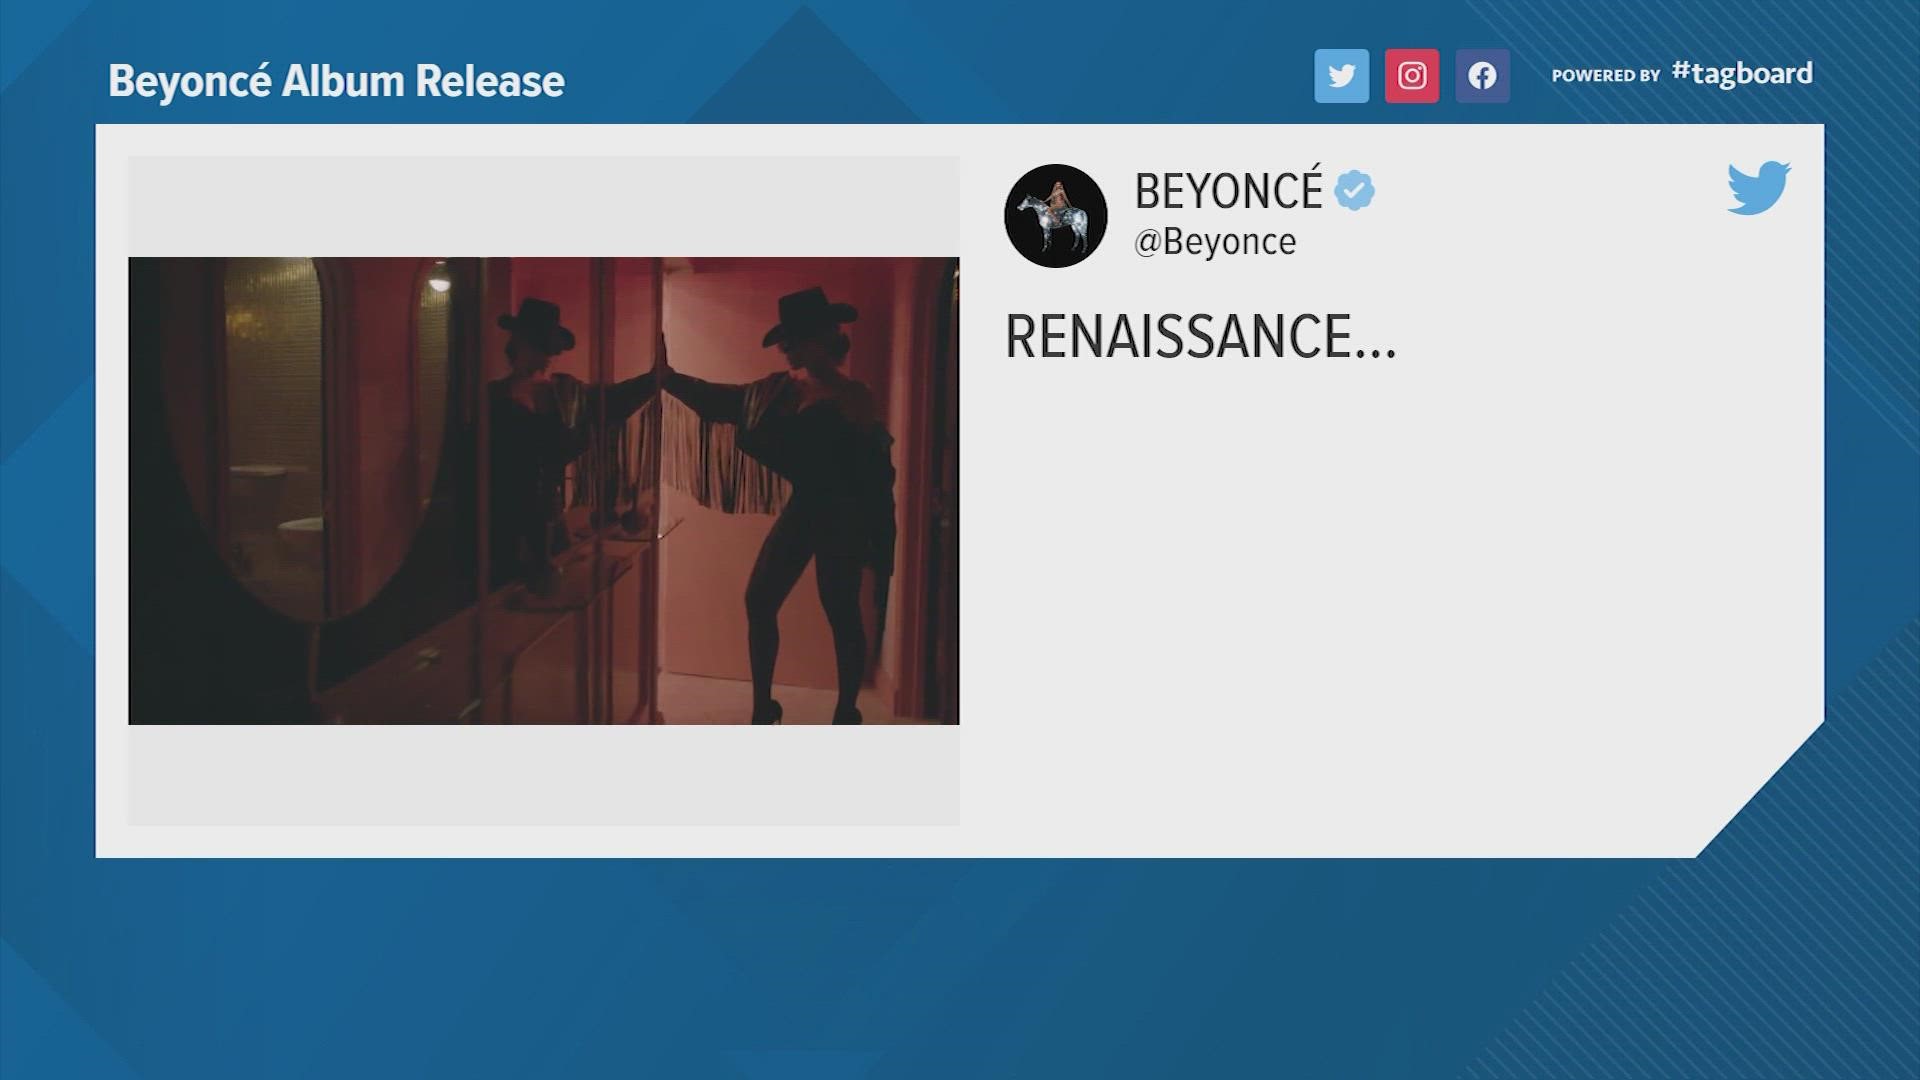 "Queen Bey" dropped her highly-anticipated, seventh studio album Friday titled "Renaissance." She said this is the first release in a trilogy of albums.